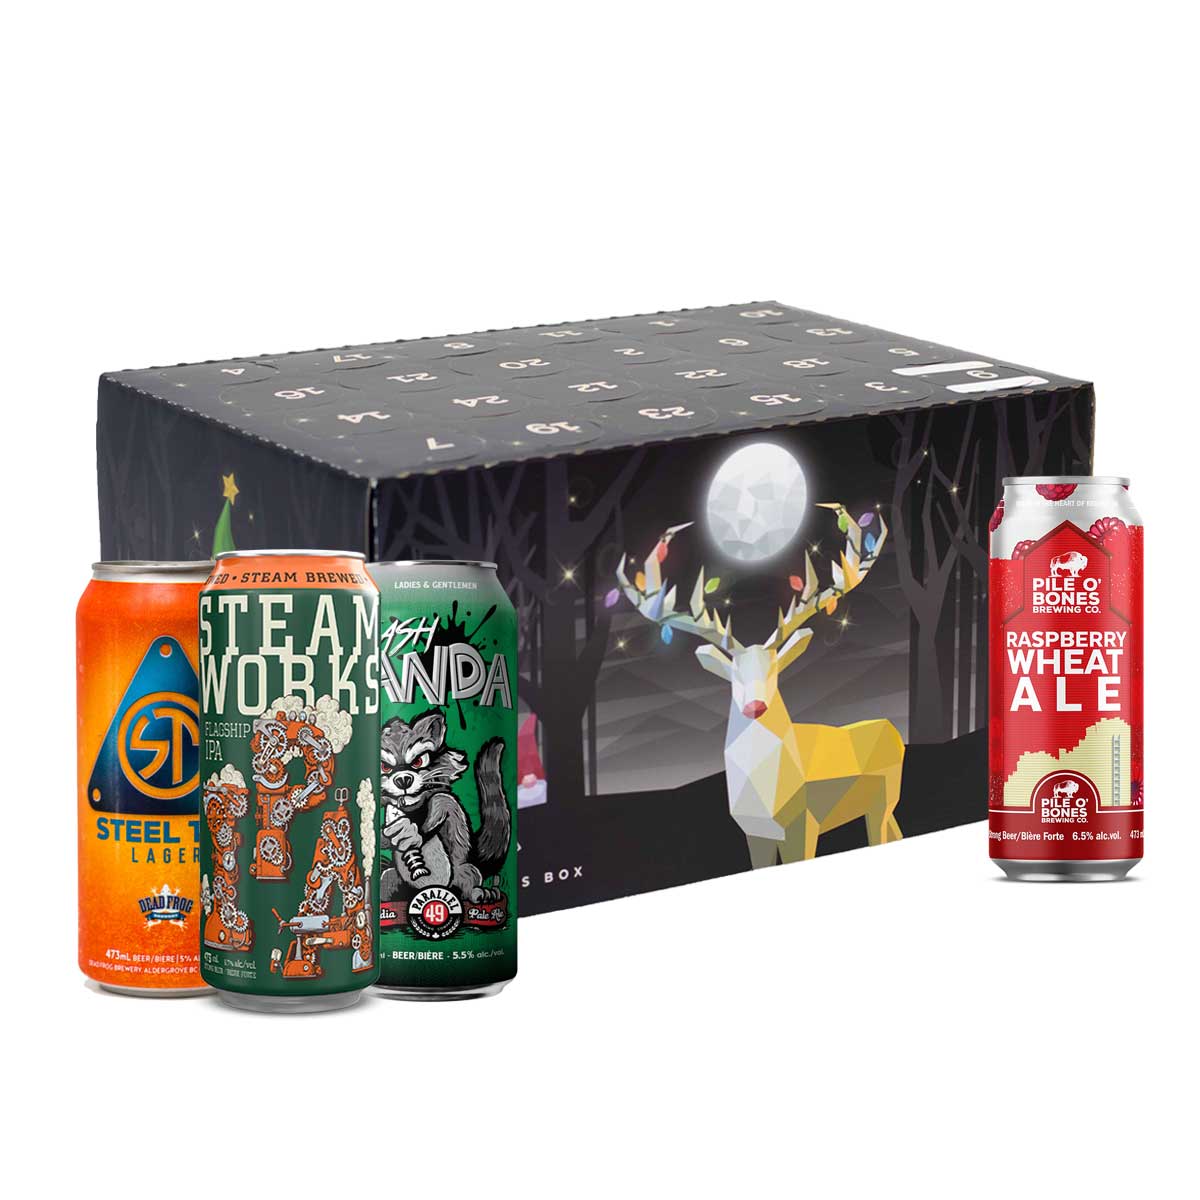 TAG Liquor Stores BC - Craft Beer Advent Calendar 24 x Assorted Tall Cans